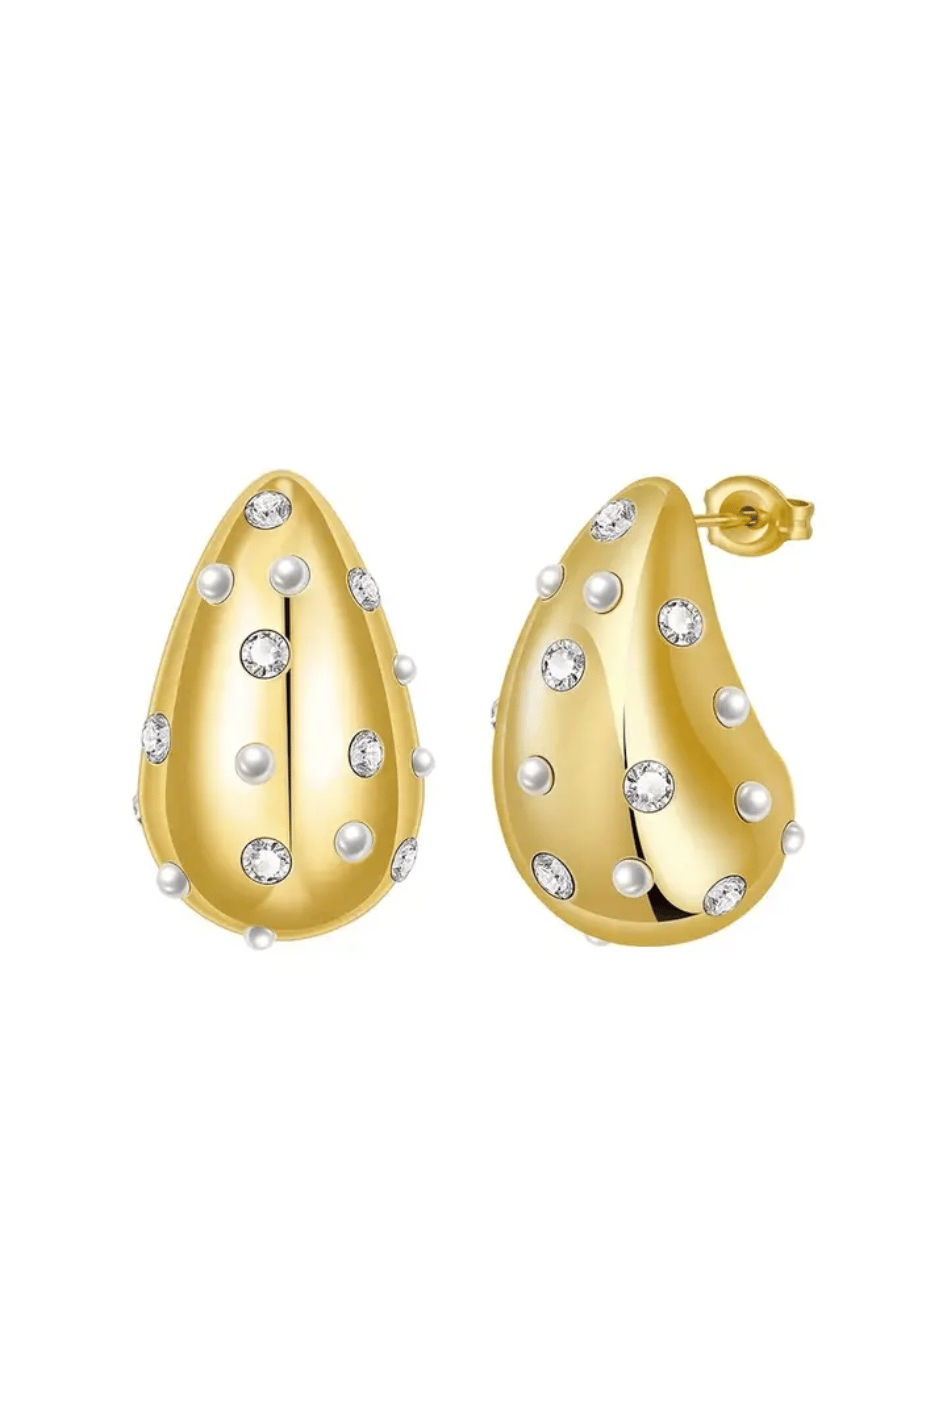 Raindrop CZ Pearl Earrings - Expressive Collective CO.